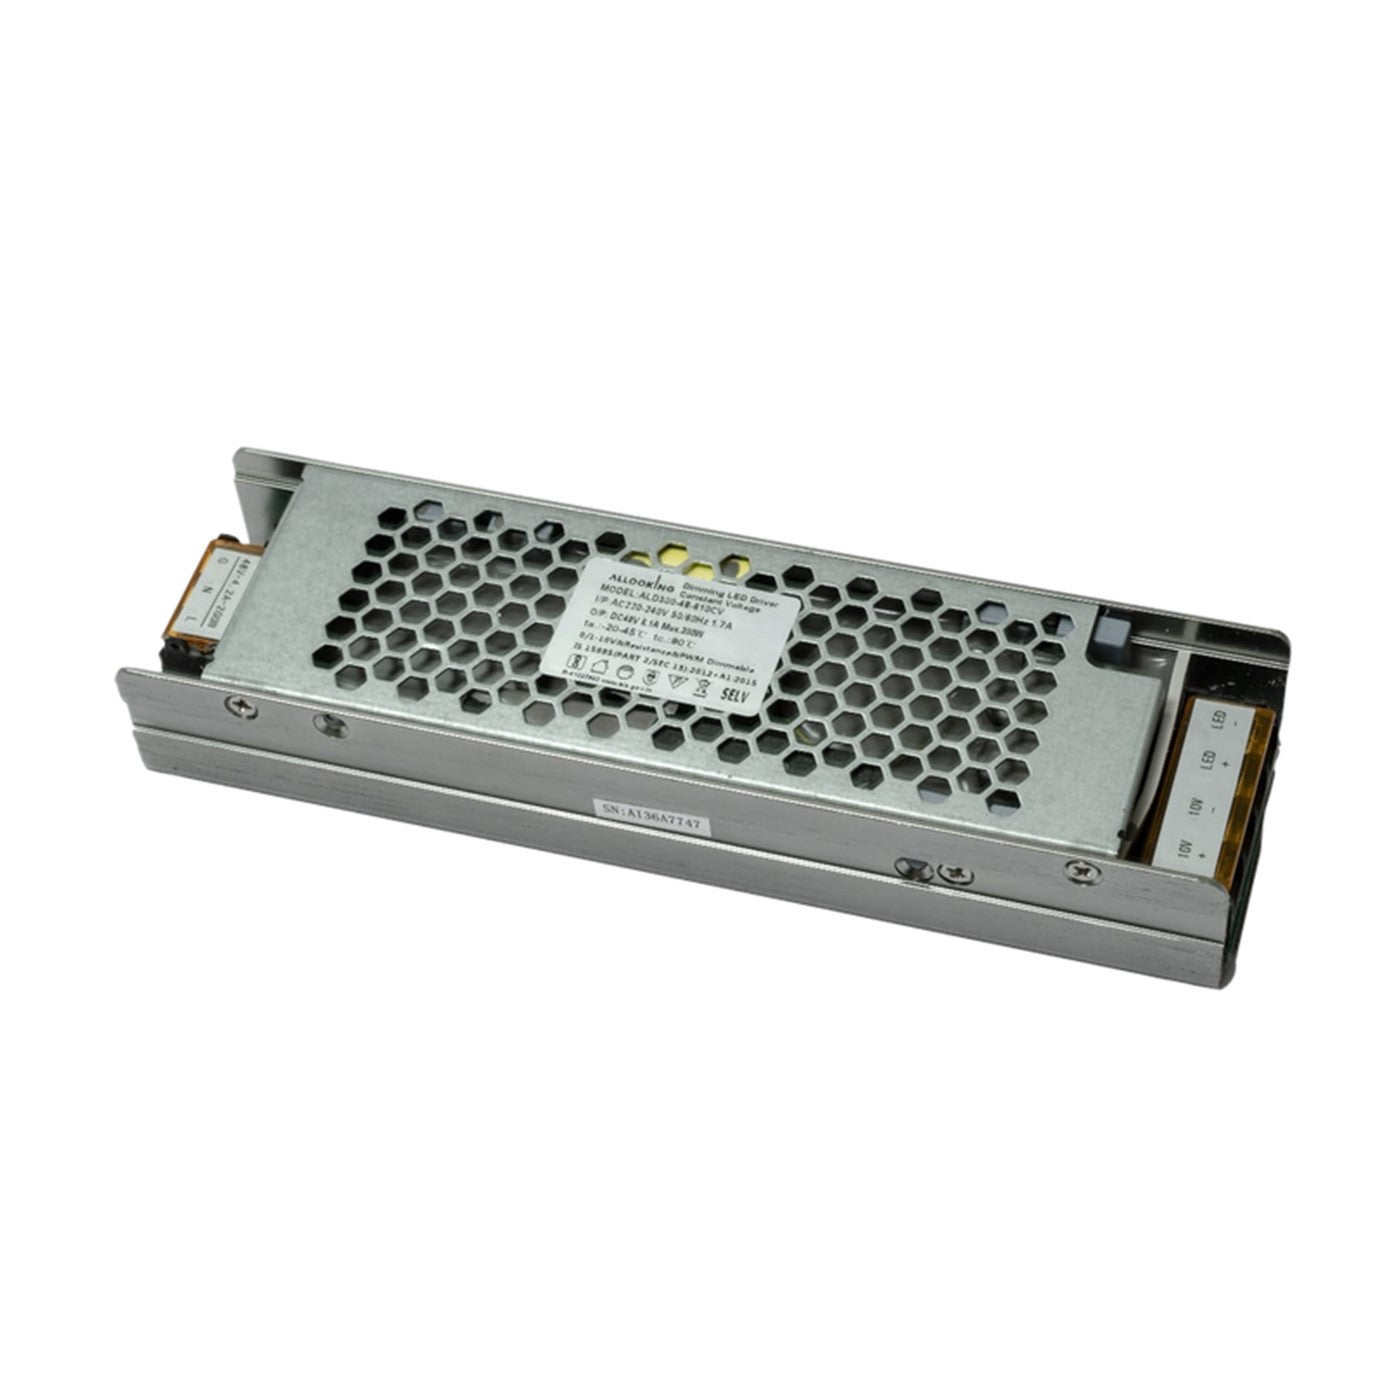 Allooking 24V 4A 100W Constant Voltage DALI-DT8 Dimmable Driver